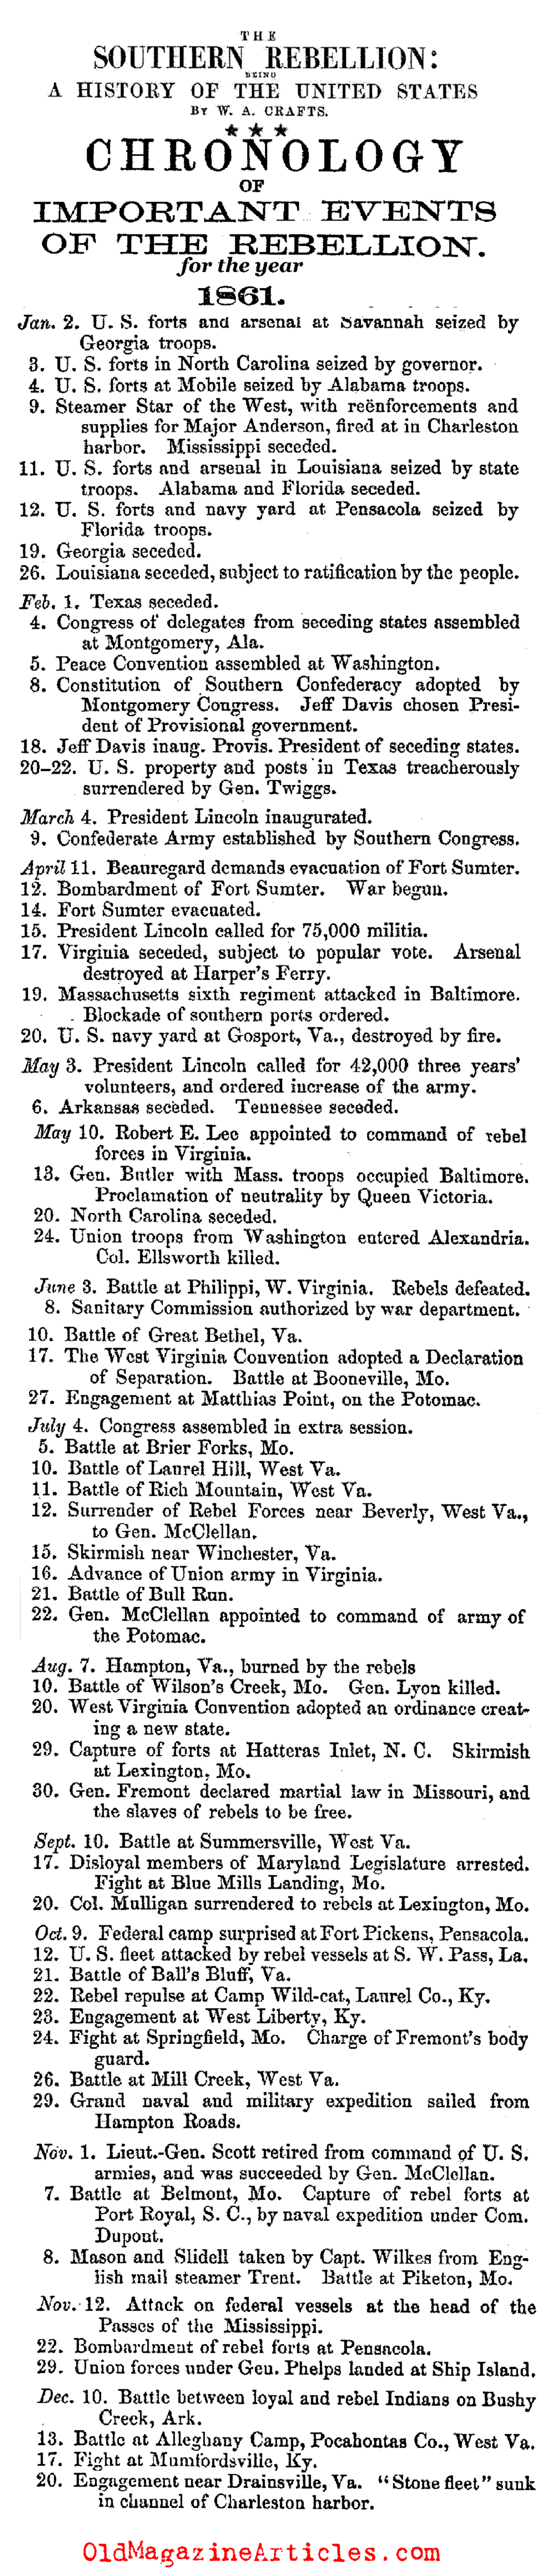 The Civil War in 1861  (The Southern Rebellion, 1867)